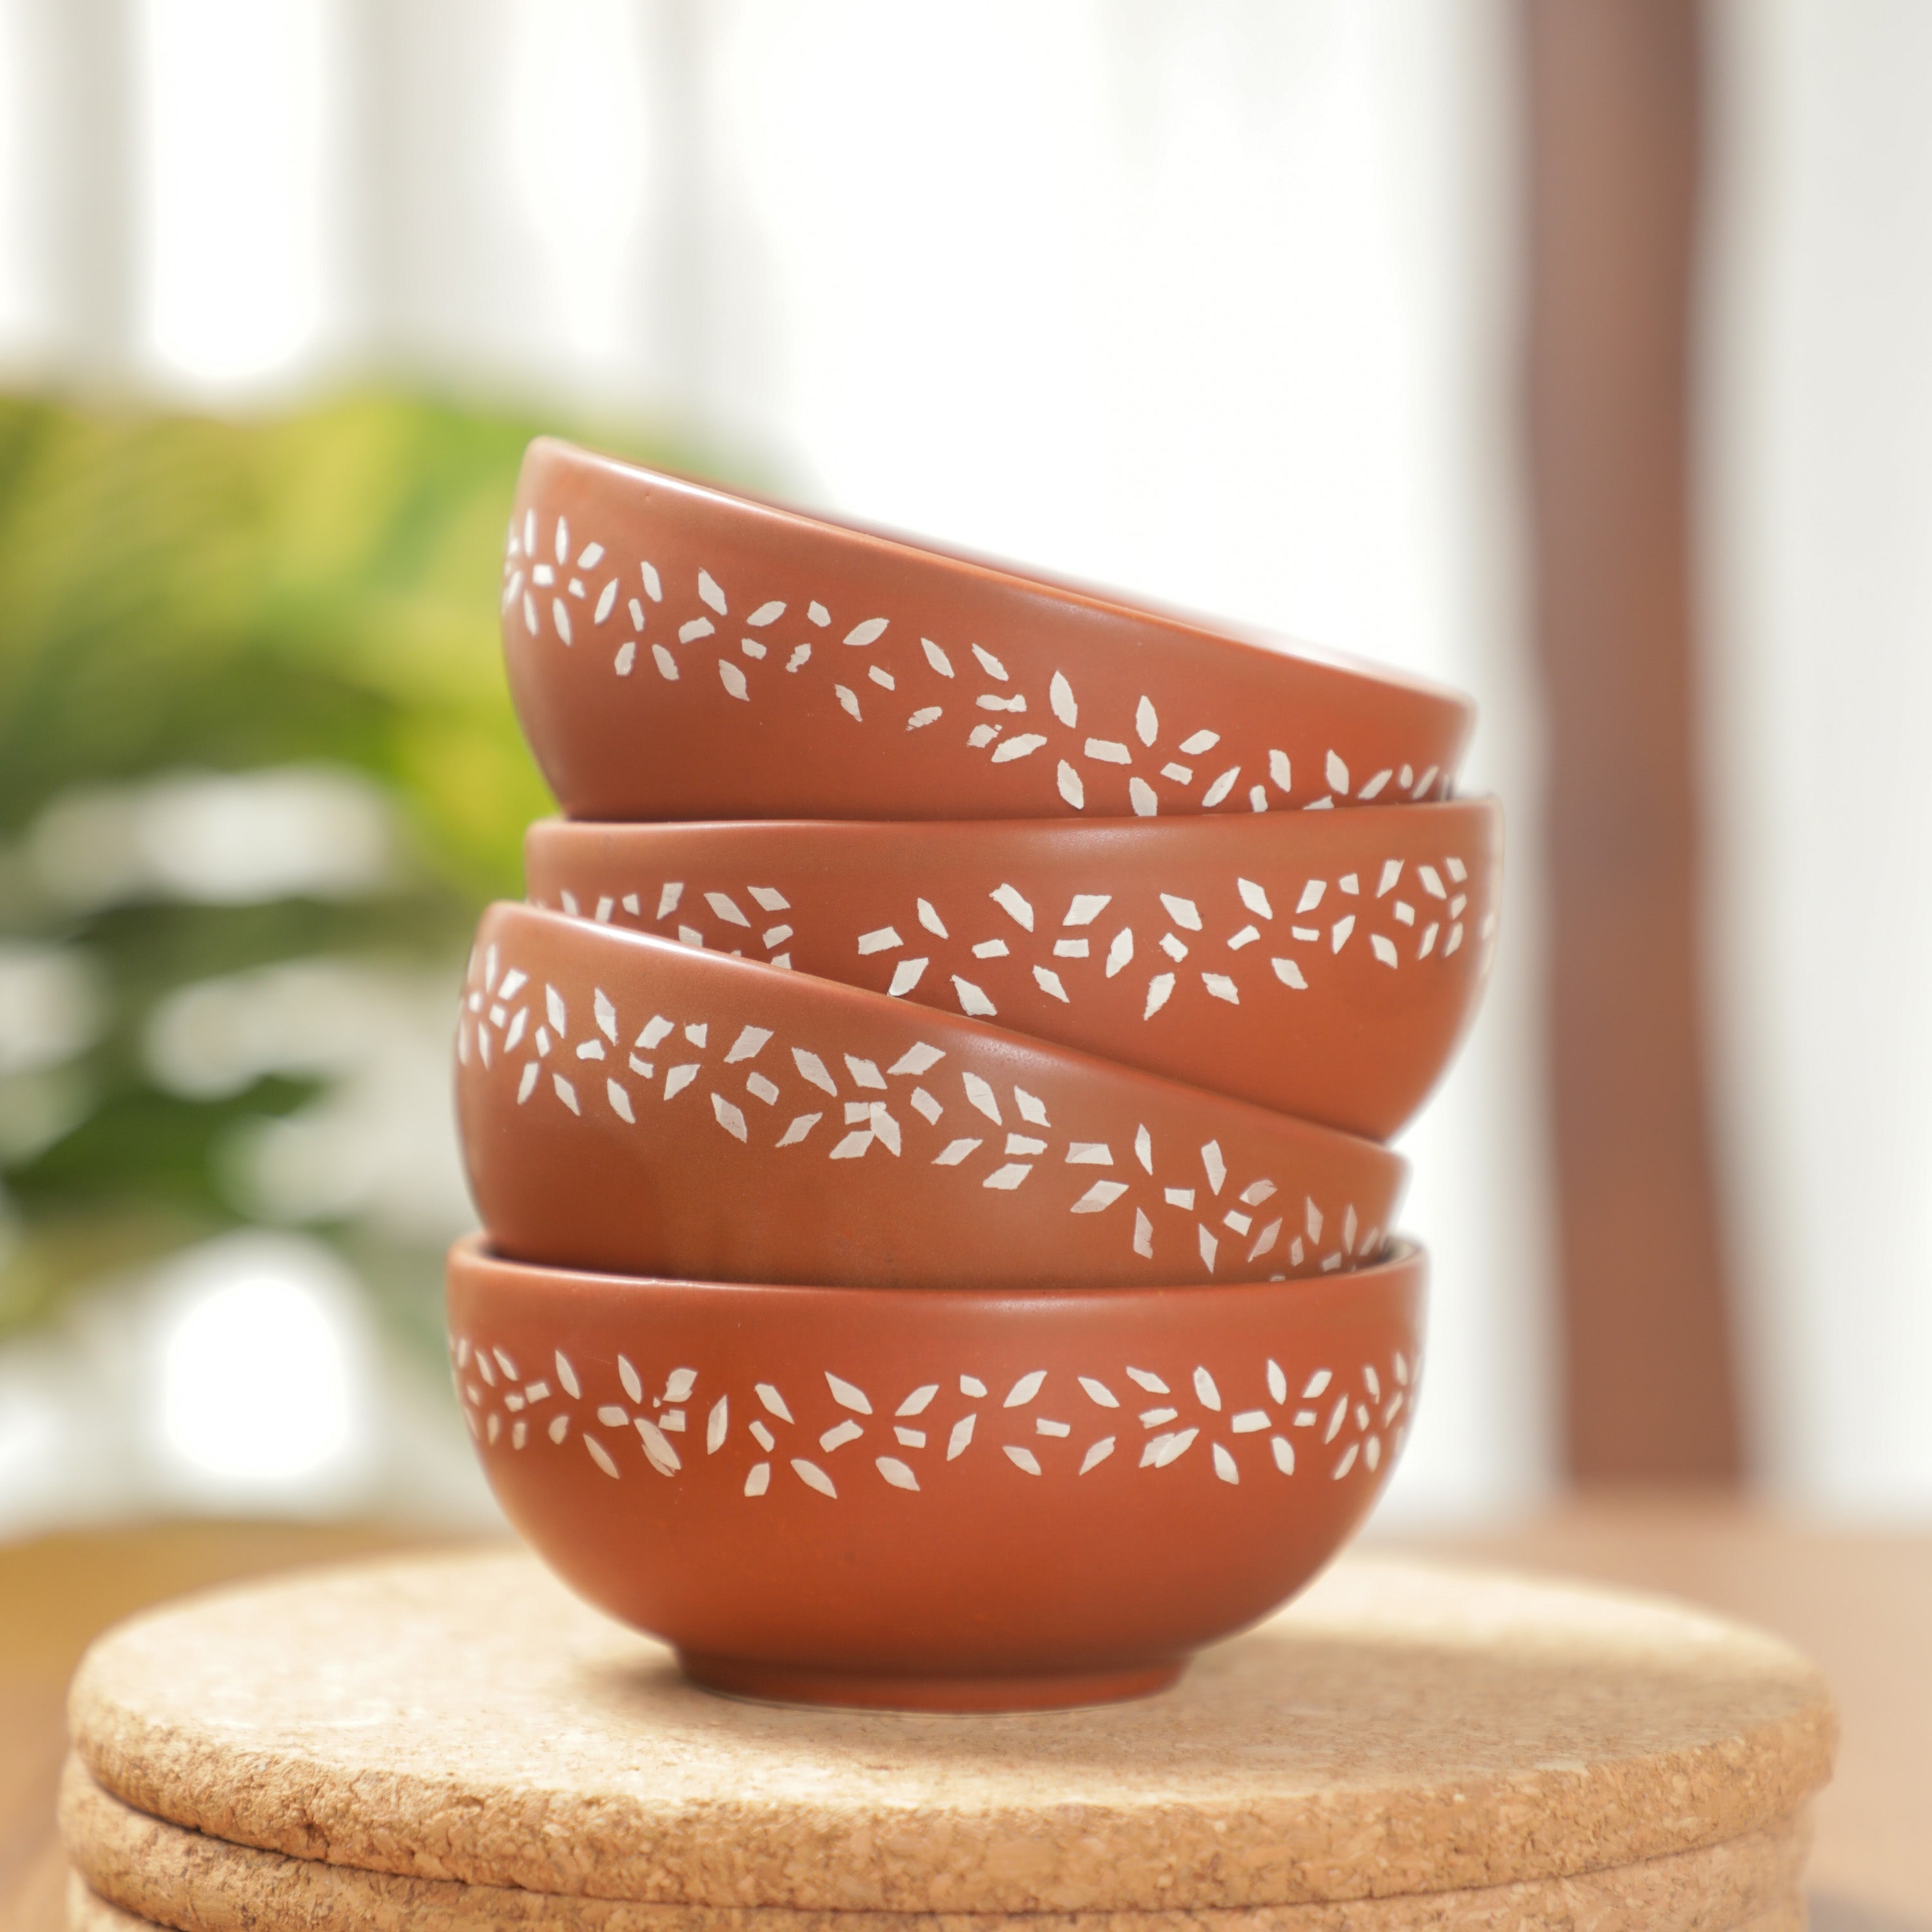 Indian Traditional Soup Bowl from Desifavors - Made in India